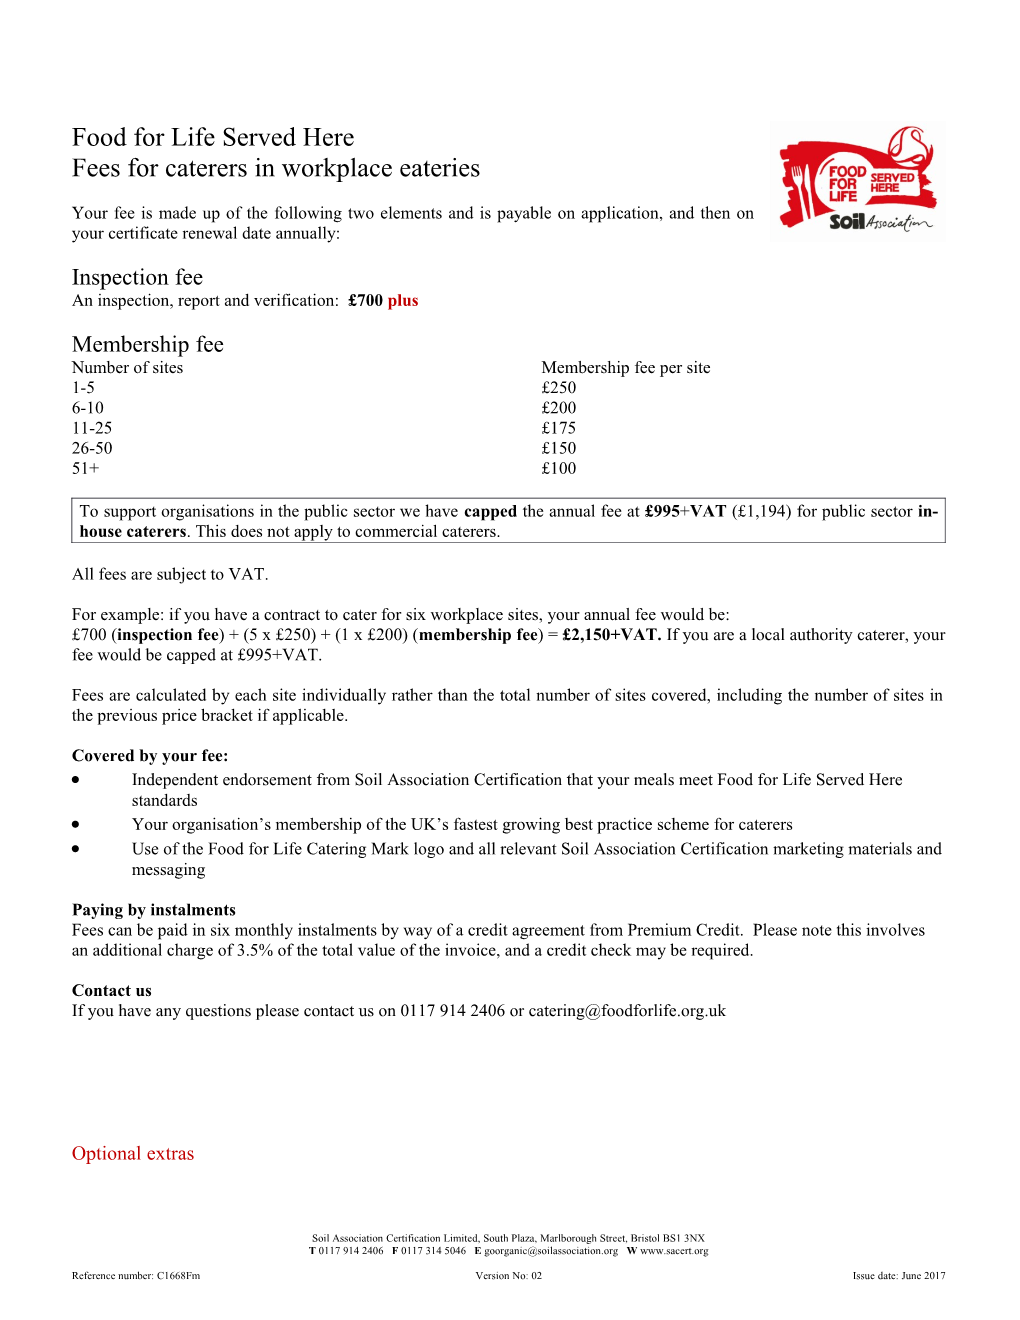 Fees for Caterers in Workplace Eateries